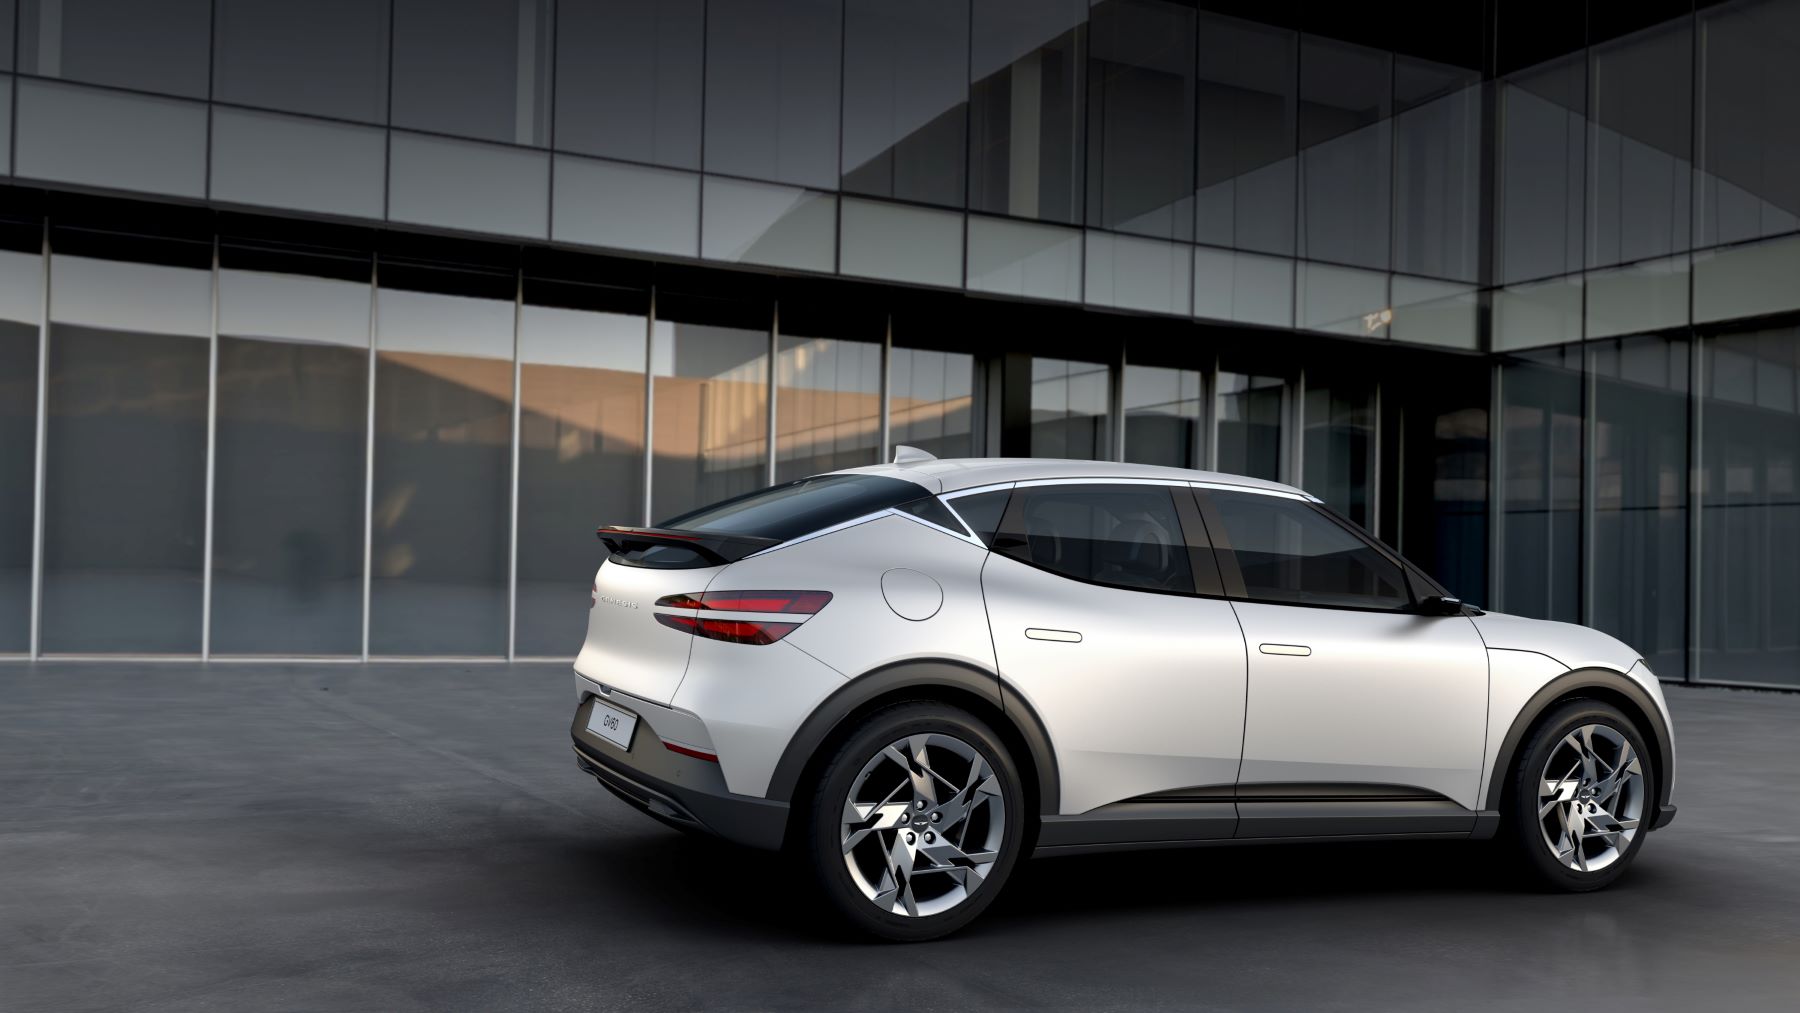 A white 2023 Genesis GV60 luxury electric compact SUV model